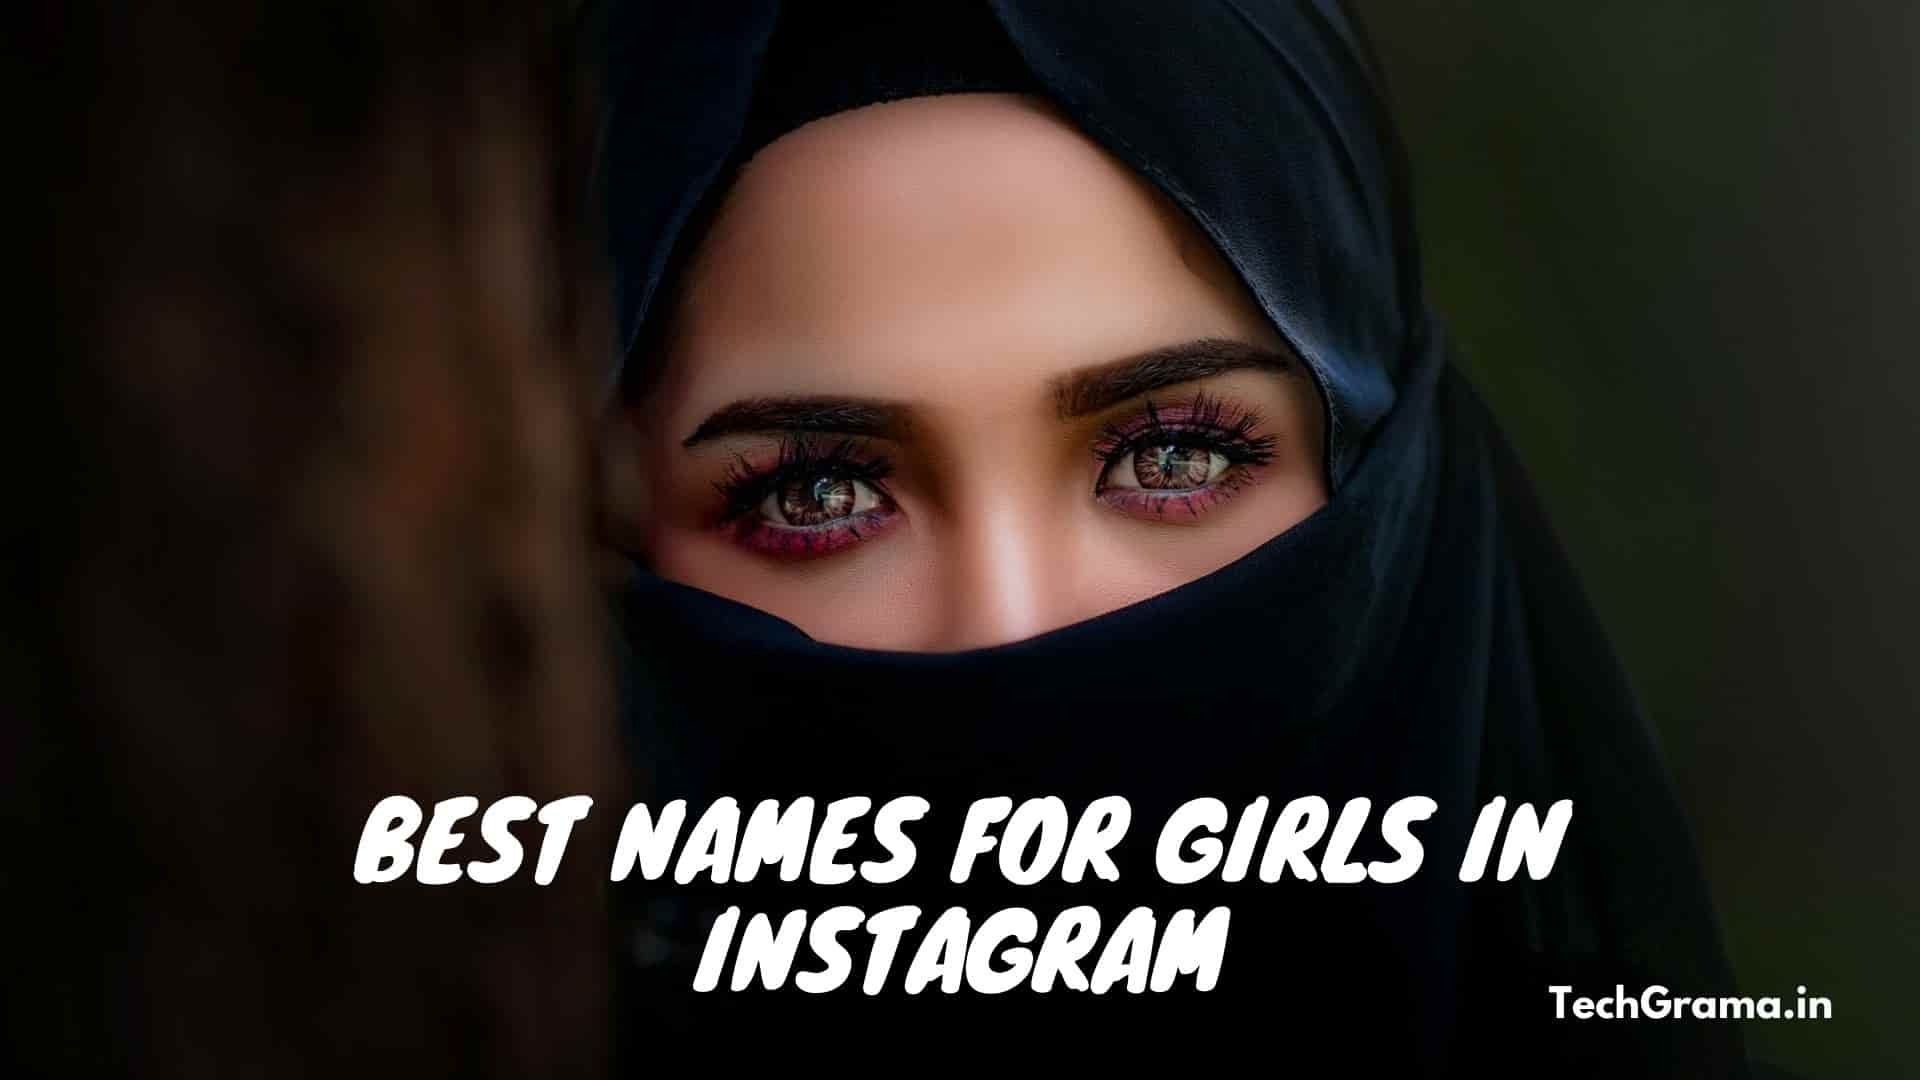 Best Instagram Names To Get Followers For Girls, What Are Good Instagram Names For a Girl, Whats a Good Nickname For a Girl, Good Instagram Usernames For Girls, Best Instagram Names For Girl Indian, Good Instagram Names For Girls, Best Insta ID Name For Girl, Best Names For Girls in Instagram